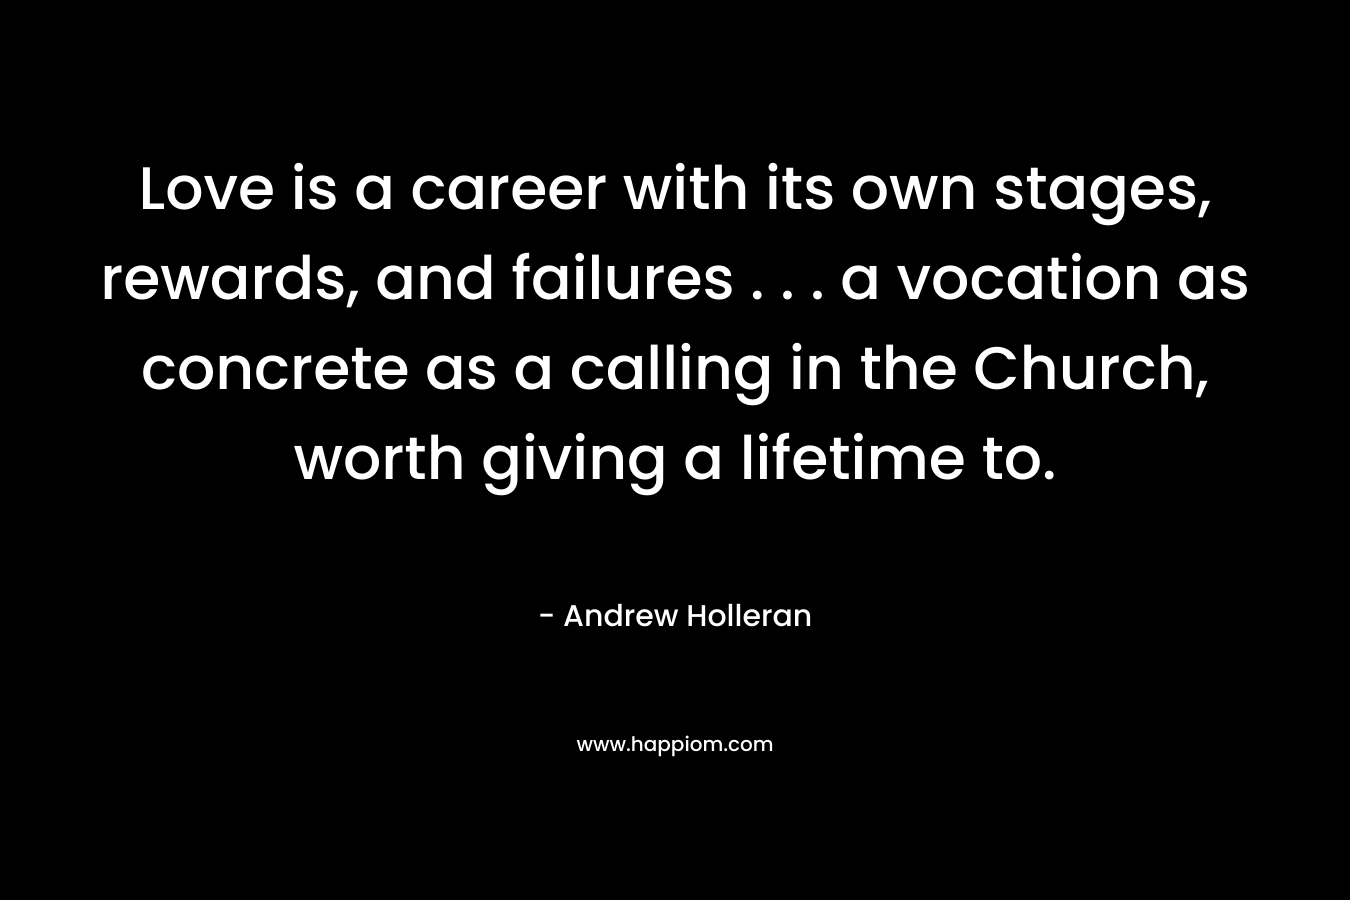 Love is a career with its own stages, rewards, and failures . . . a vocation as concrete as a calling in the Church, worth giving a lifetime to.